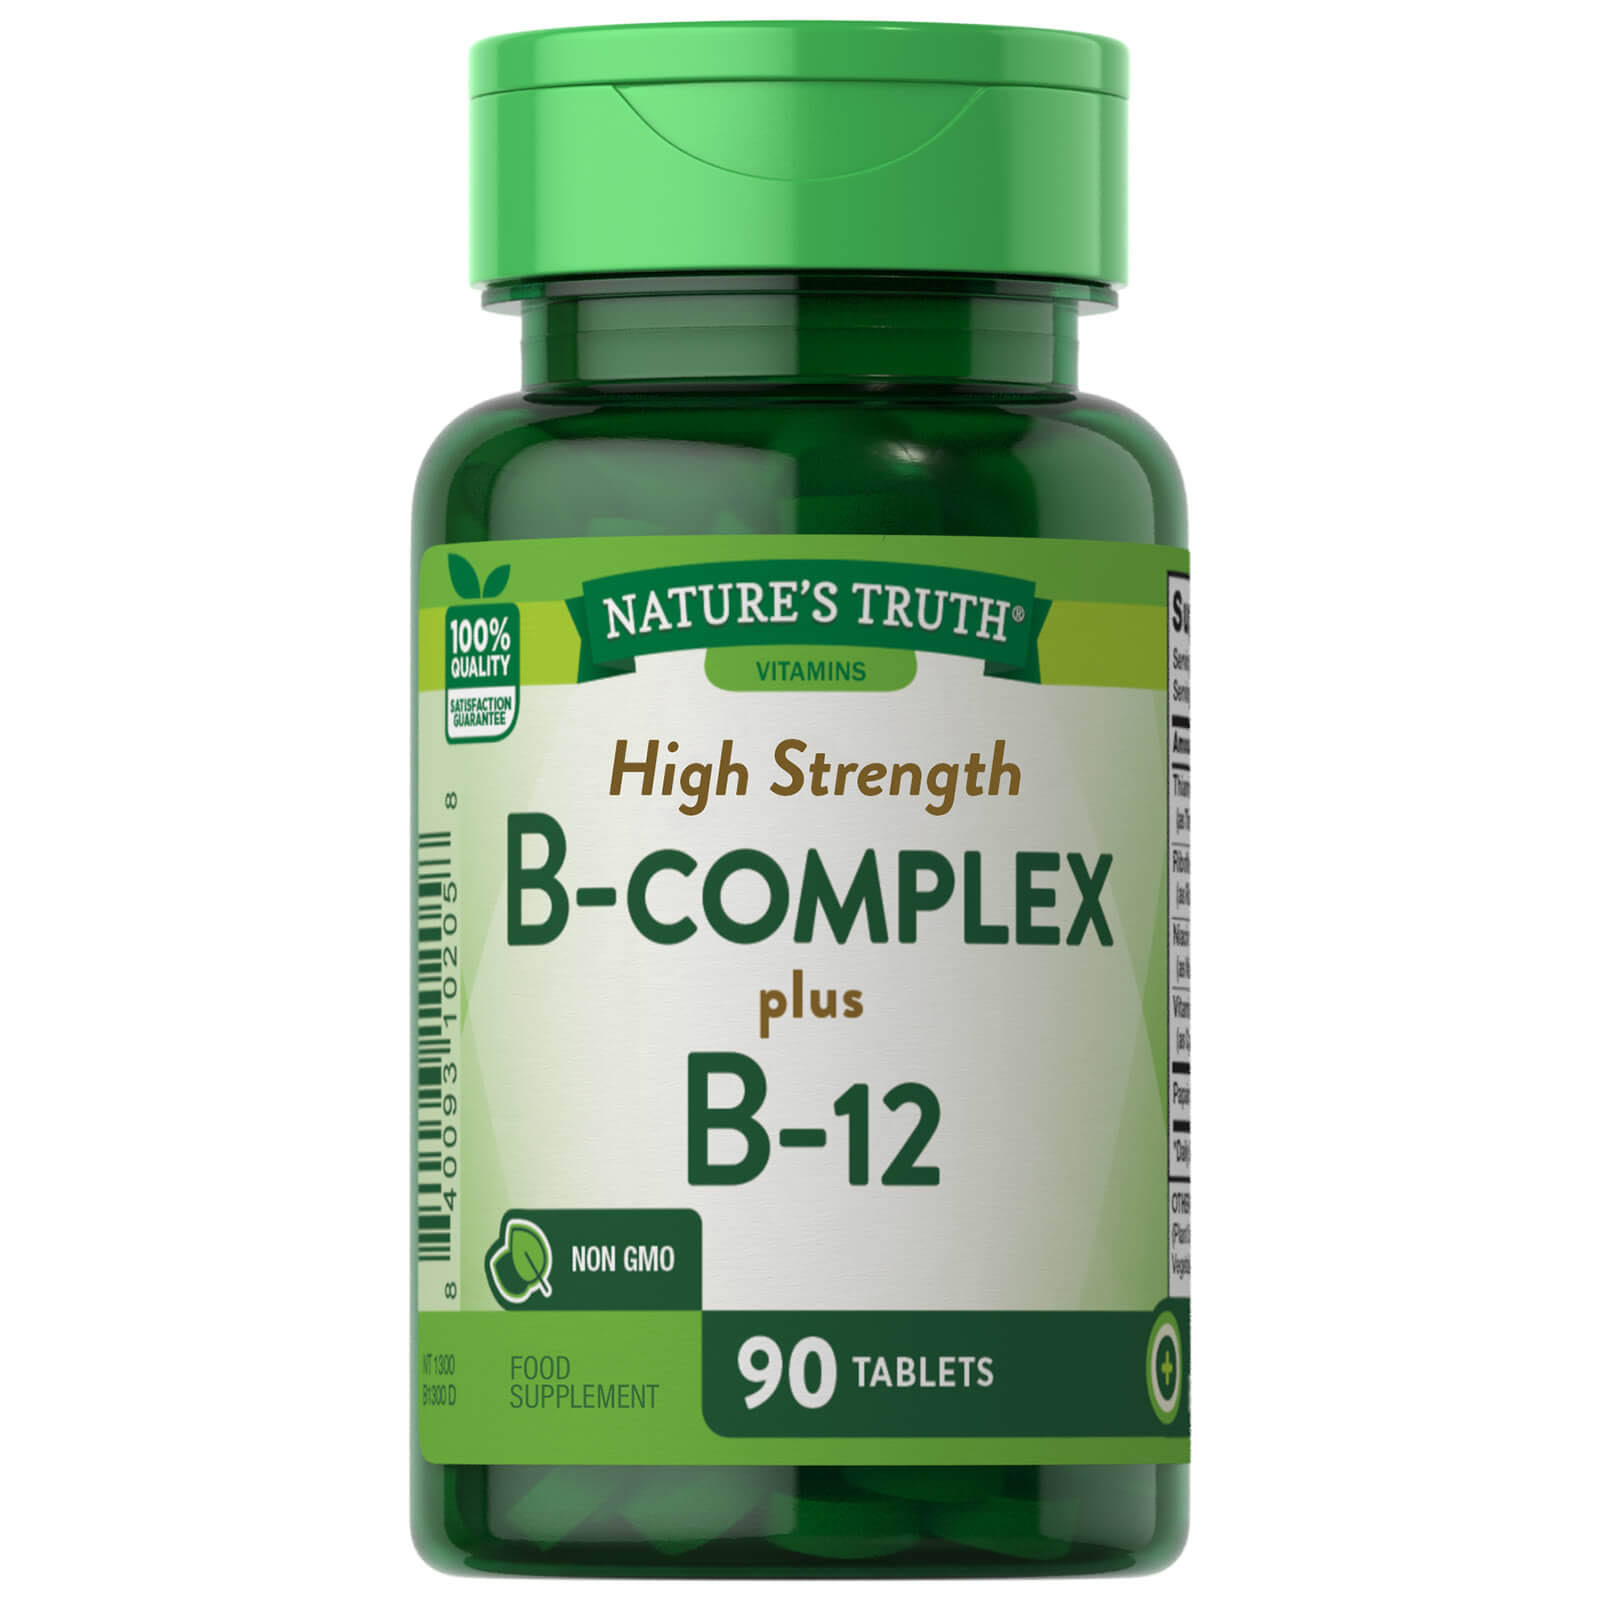 Nature's Truth High Potency B-Complex Plus B-12 - 90 Tablets